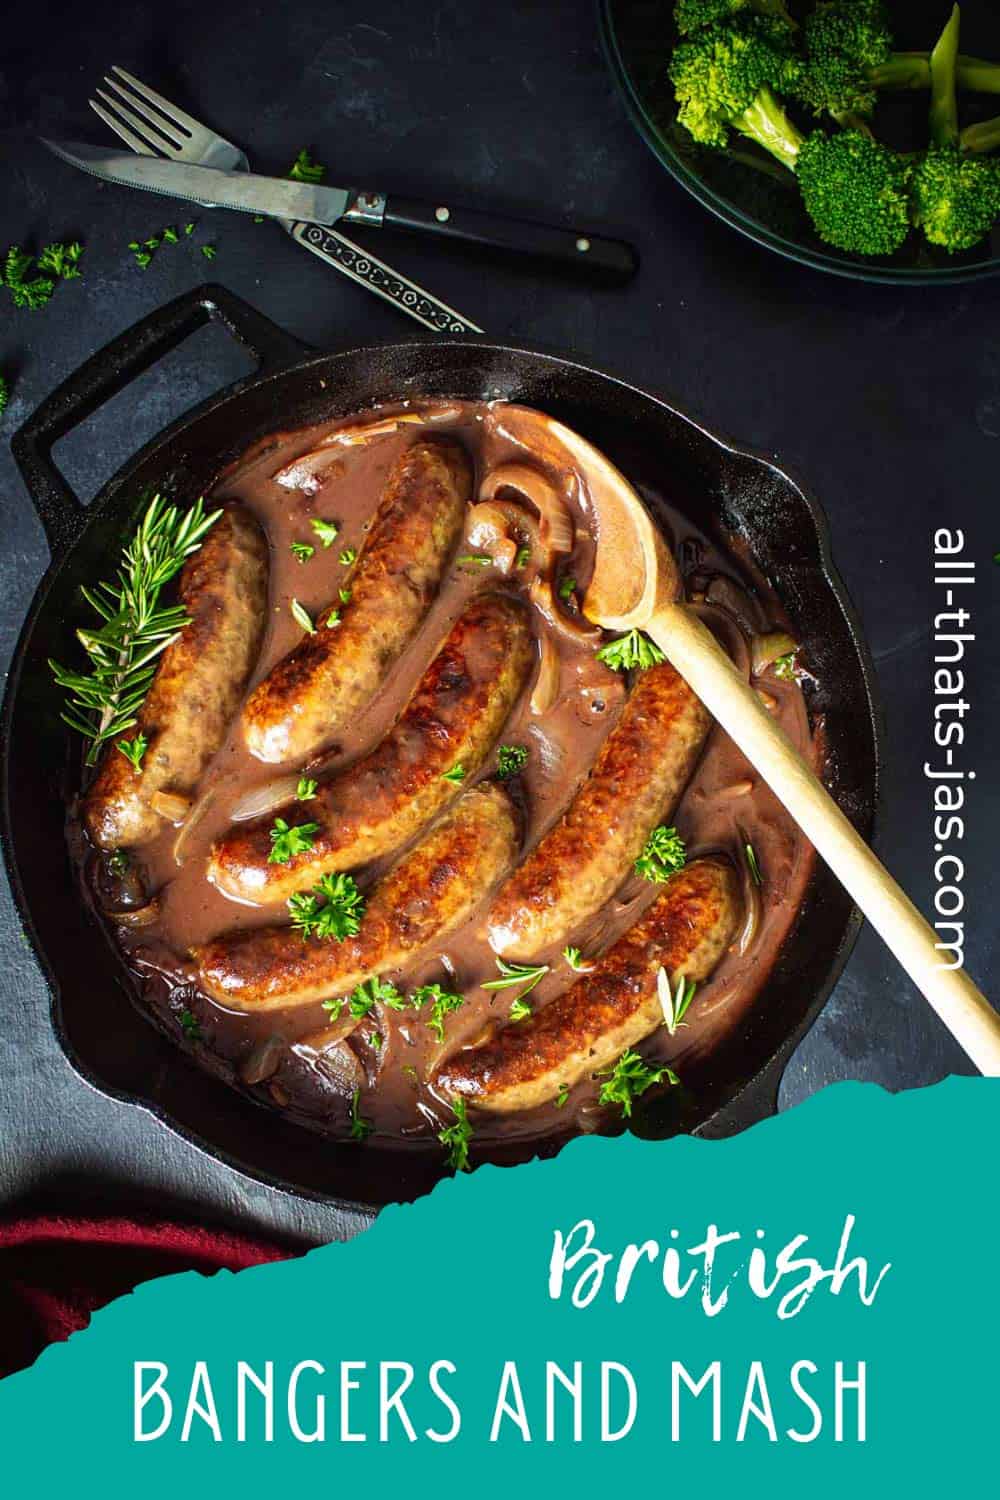 Bangers with onion sauce in a skillet with text overlay.